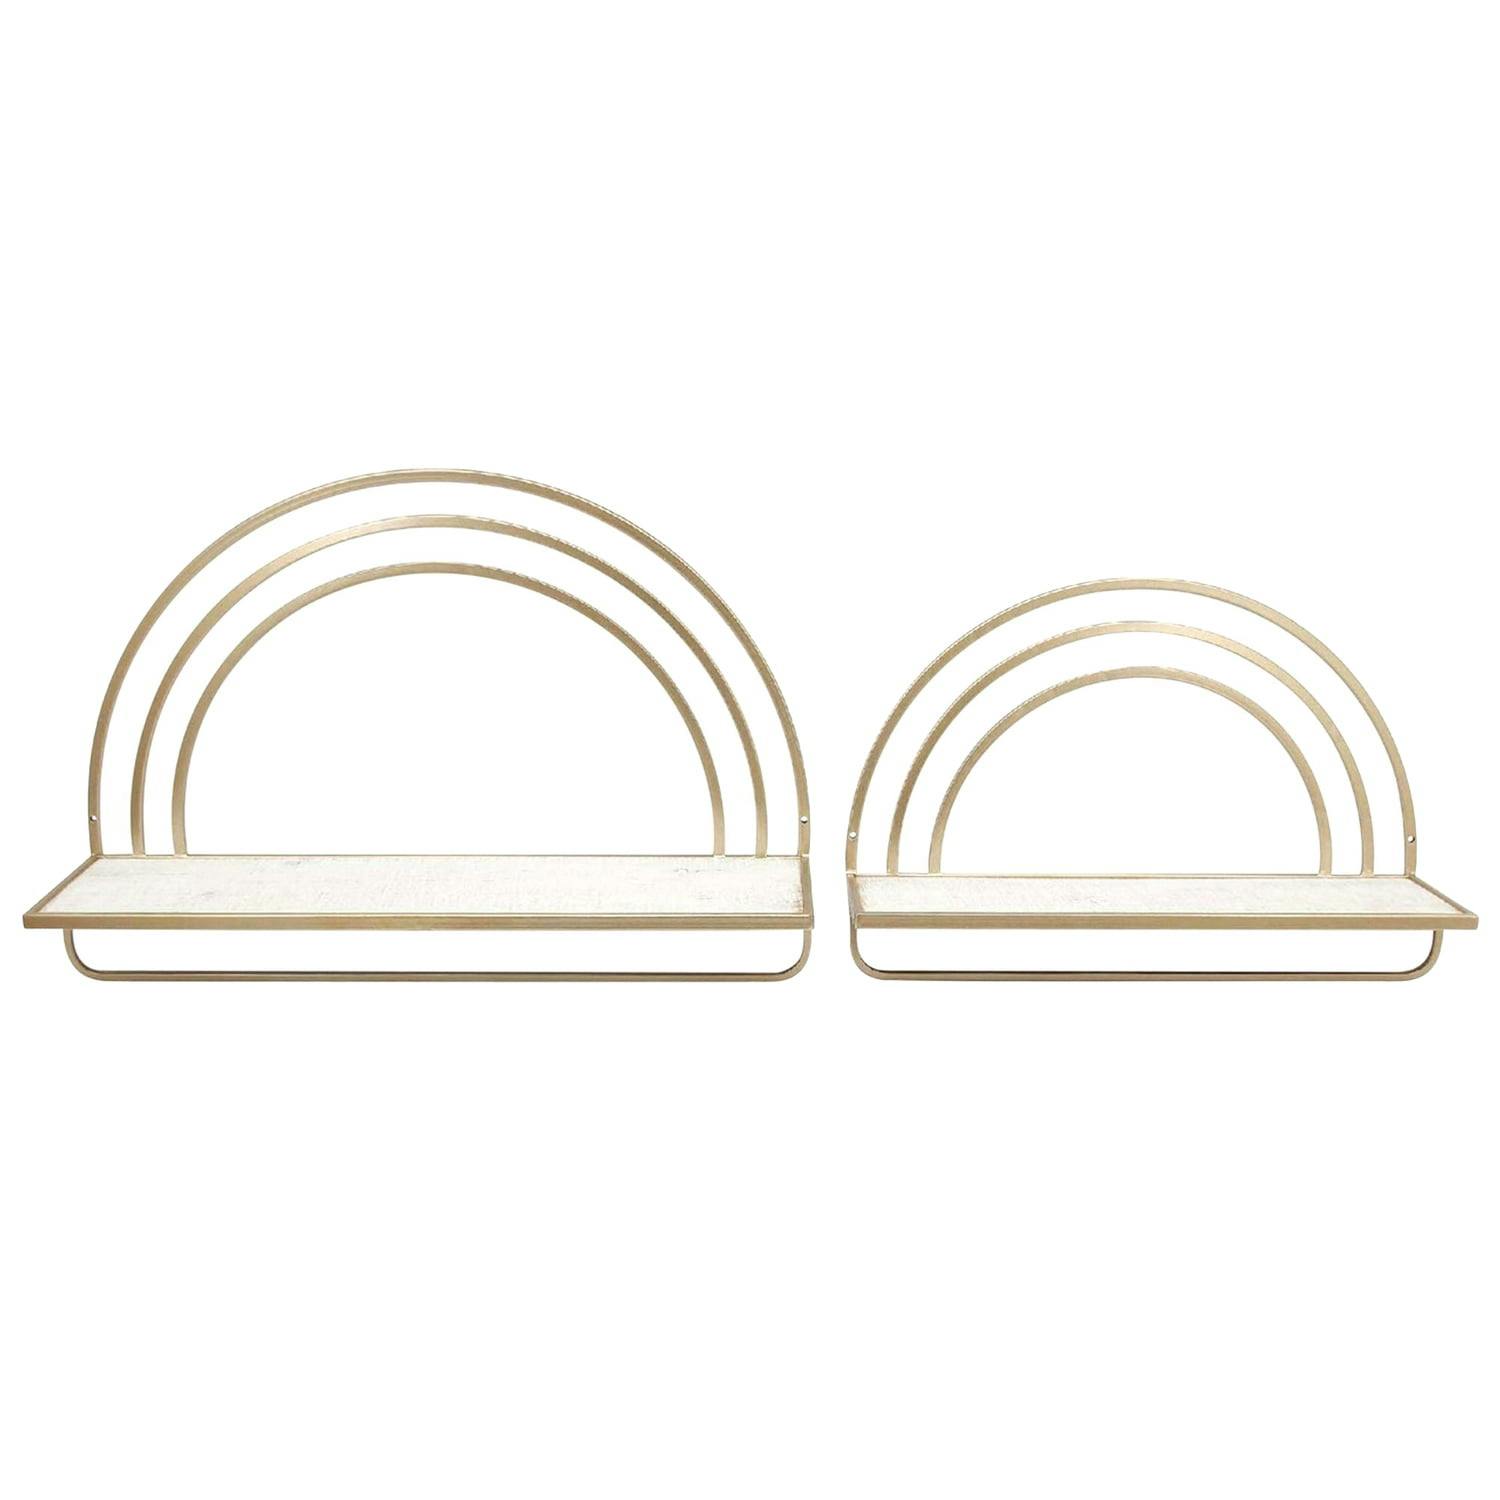 Whimsical White Wood Rainbow Arch Wall Shelves, Set of 2